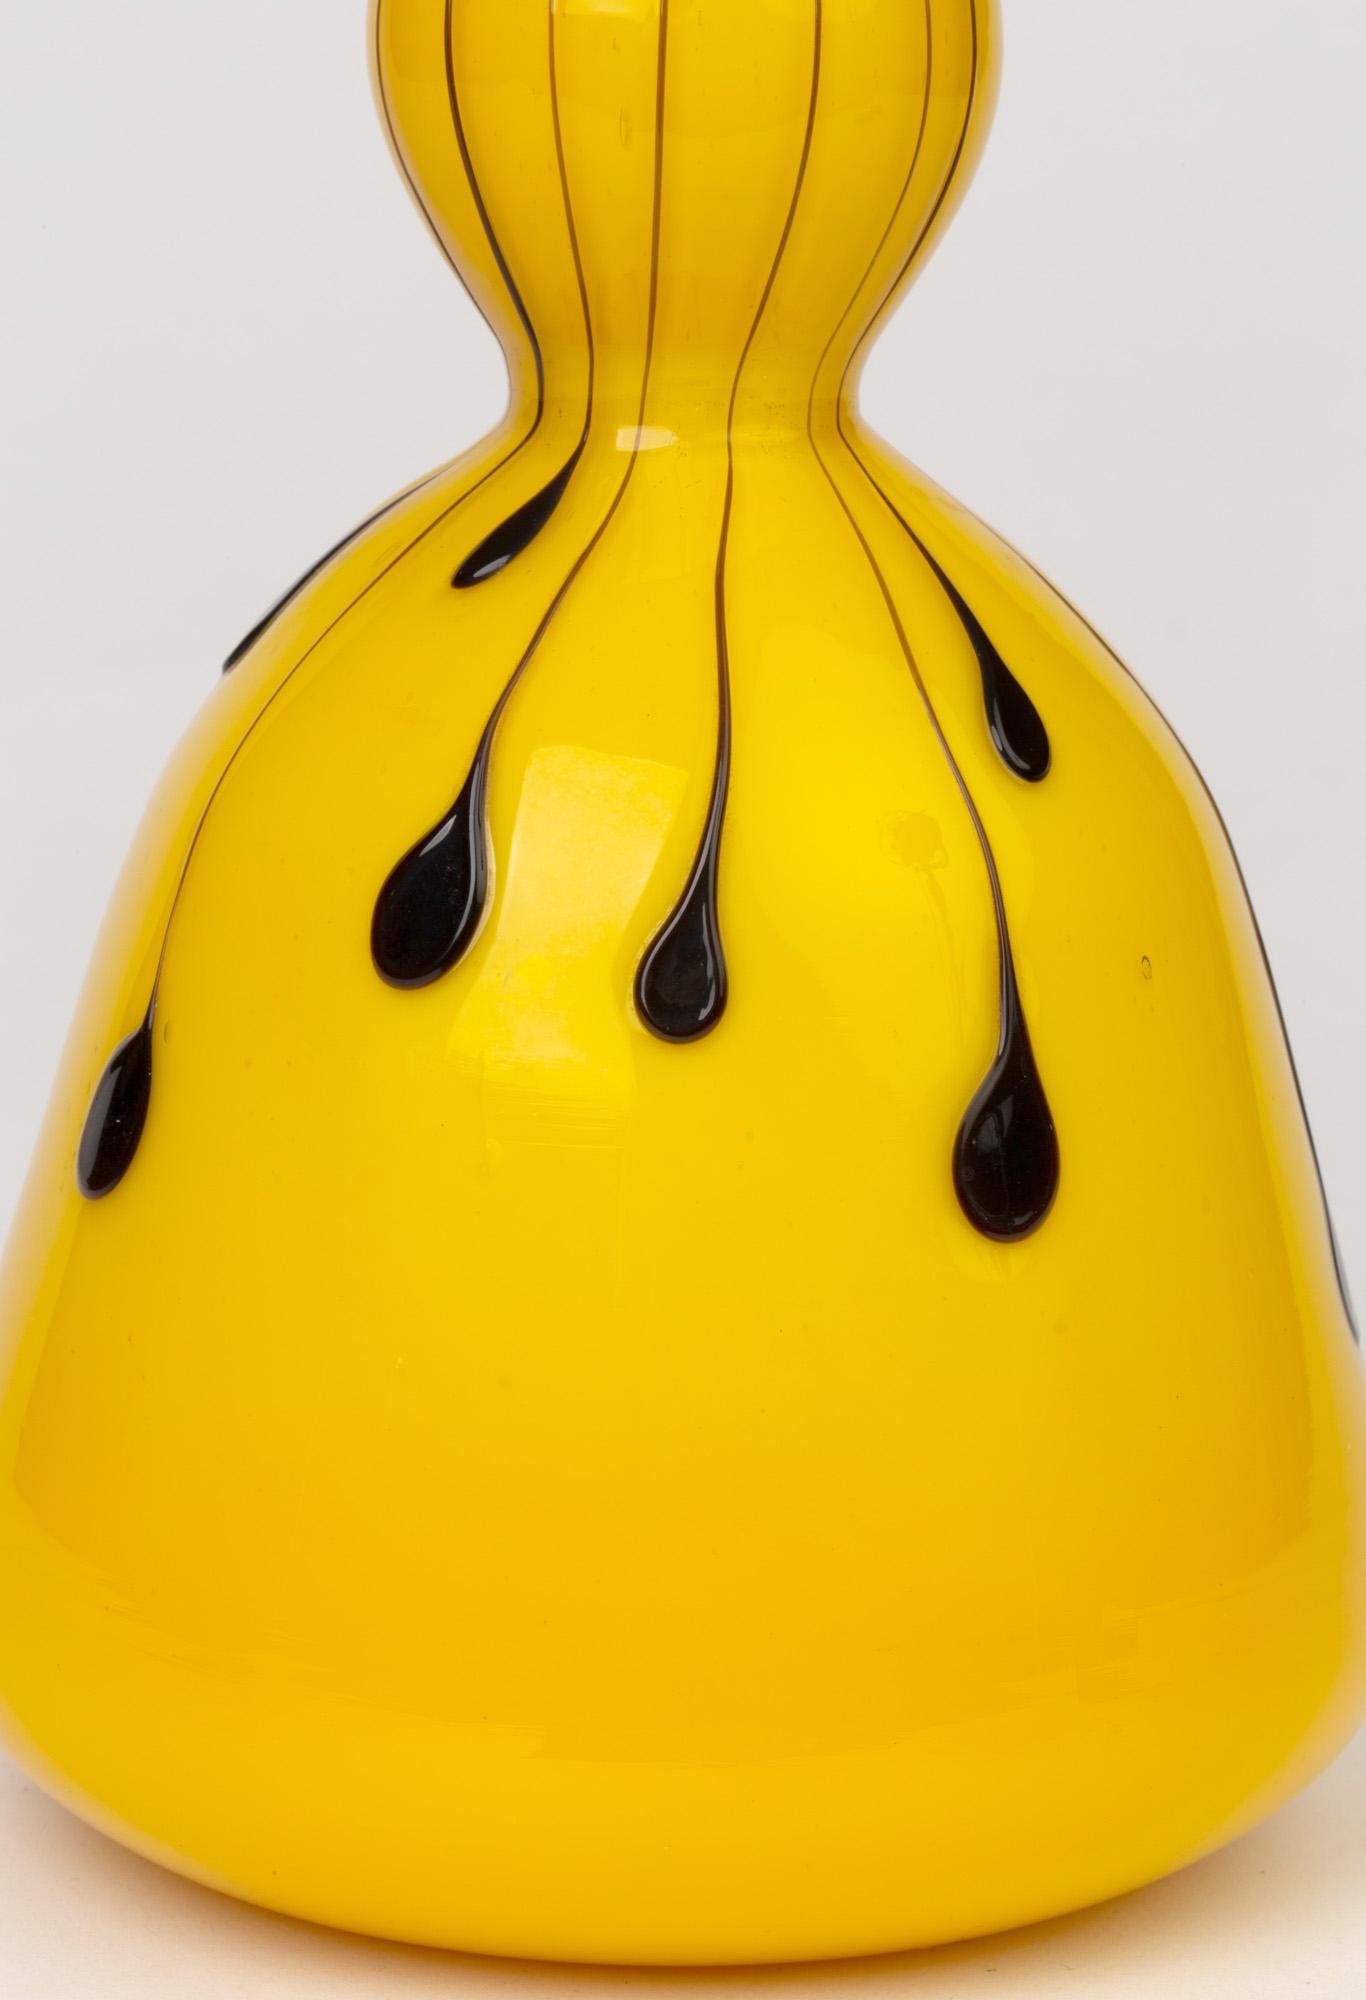 Fratelli Toso Murano Yellow Art Glass Mallet Shaped Vase For Sale 4